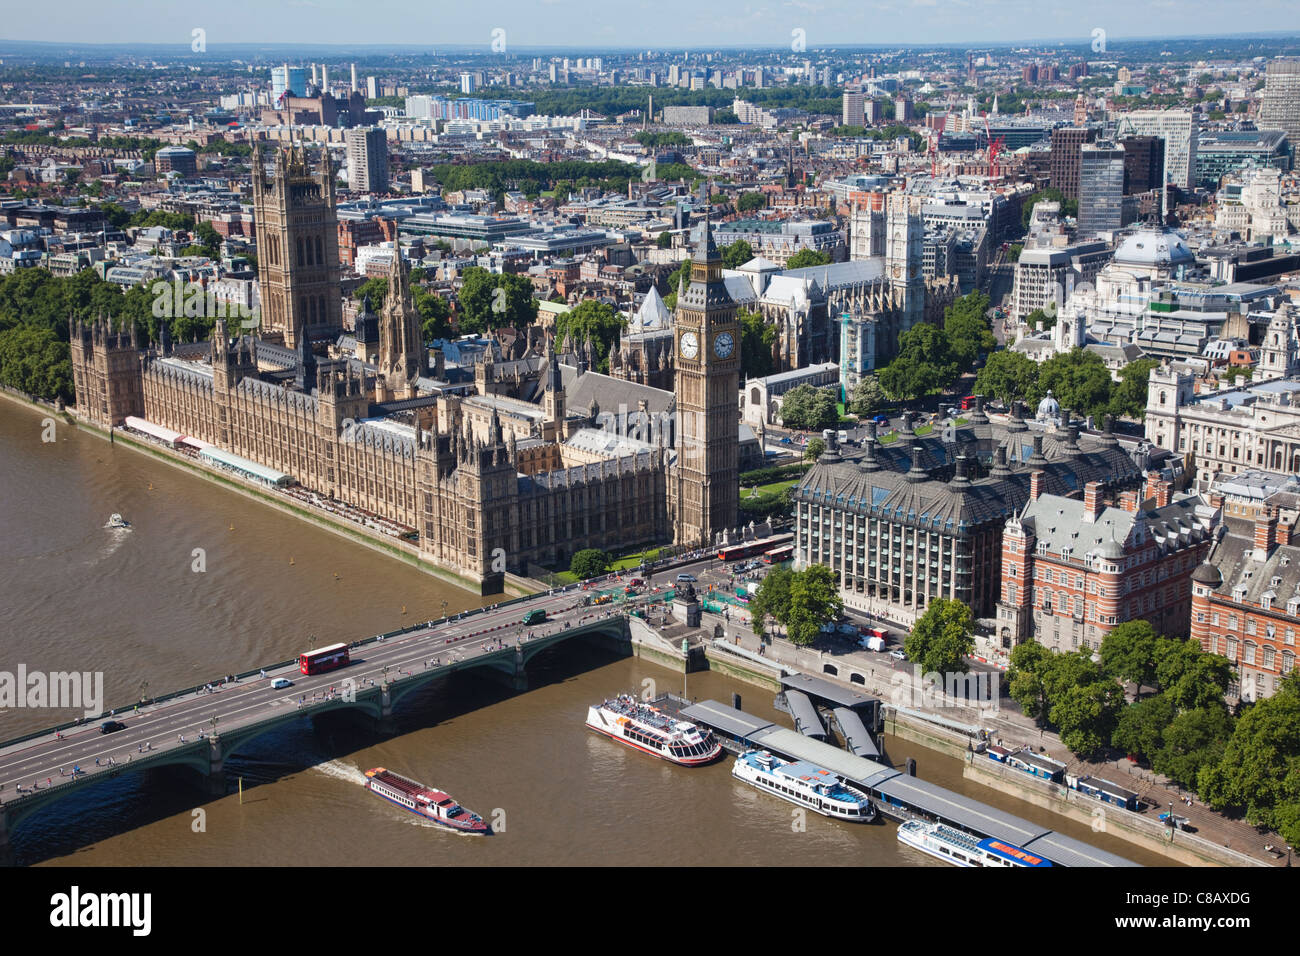 England, London, Palace of Westminster and River Thames, View from the London Eye Stock Photo